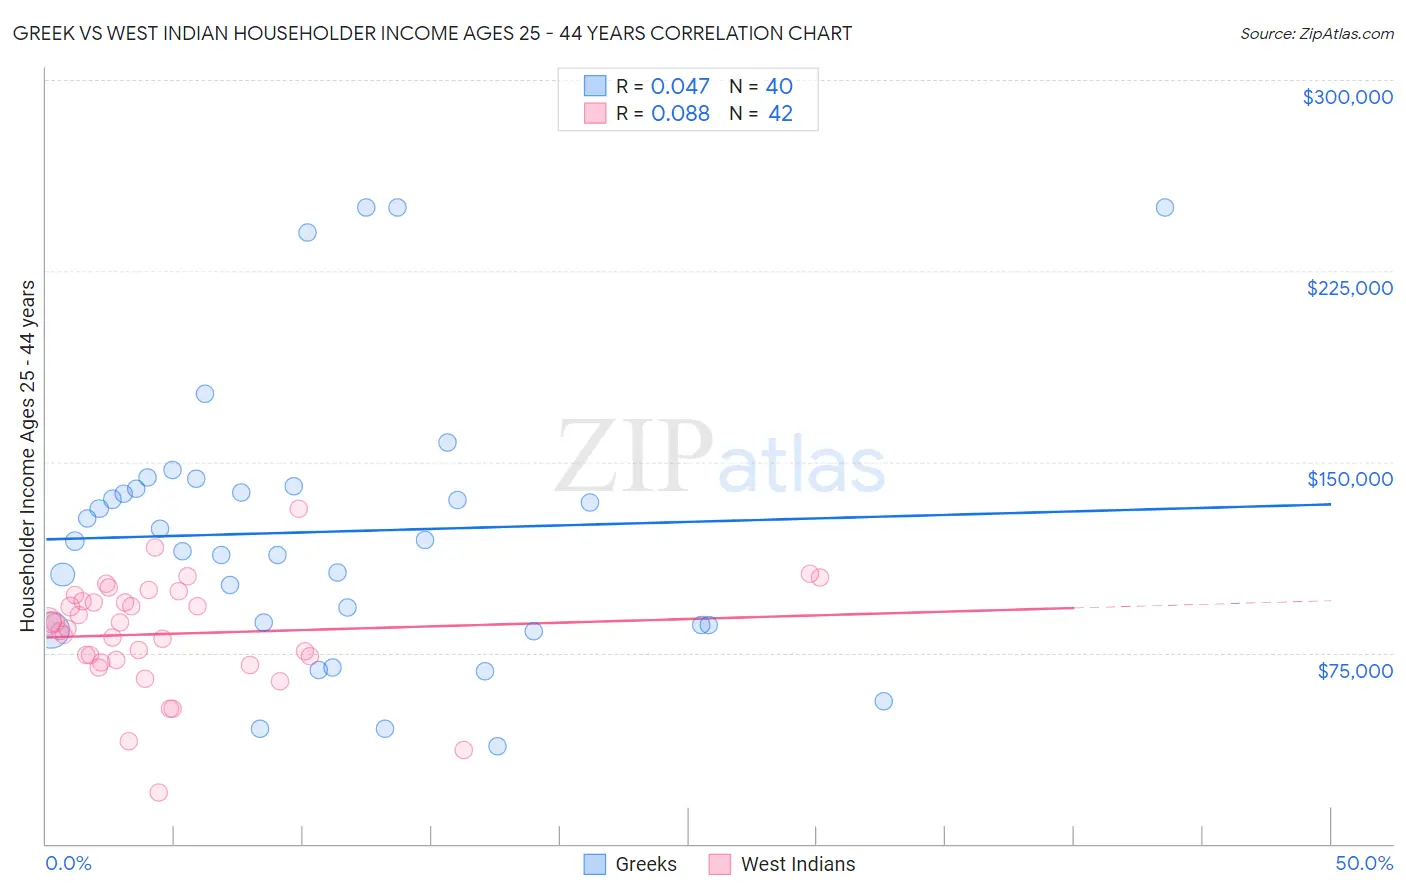 Greek vs West Indian Householder Income Ages 25 - 44 years